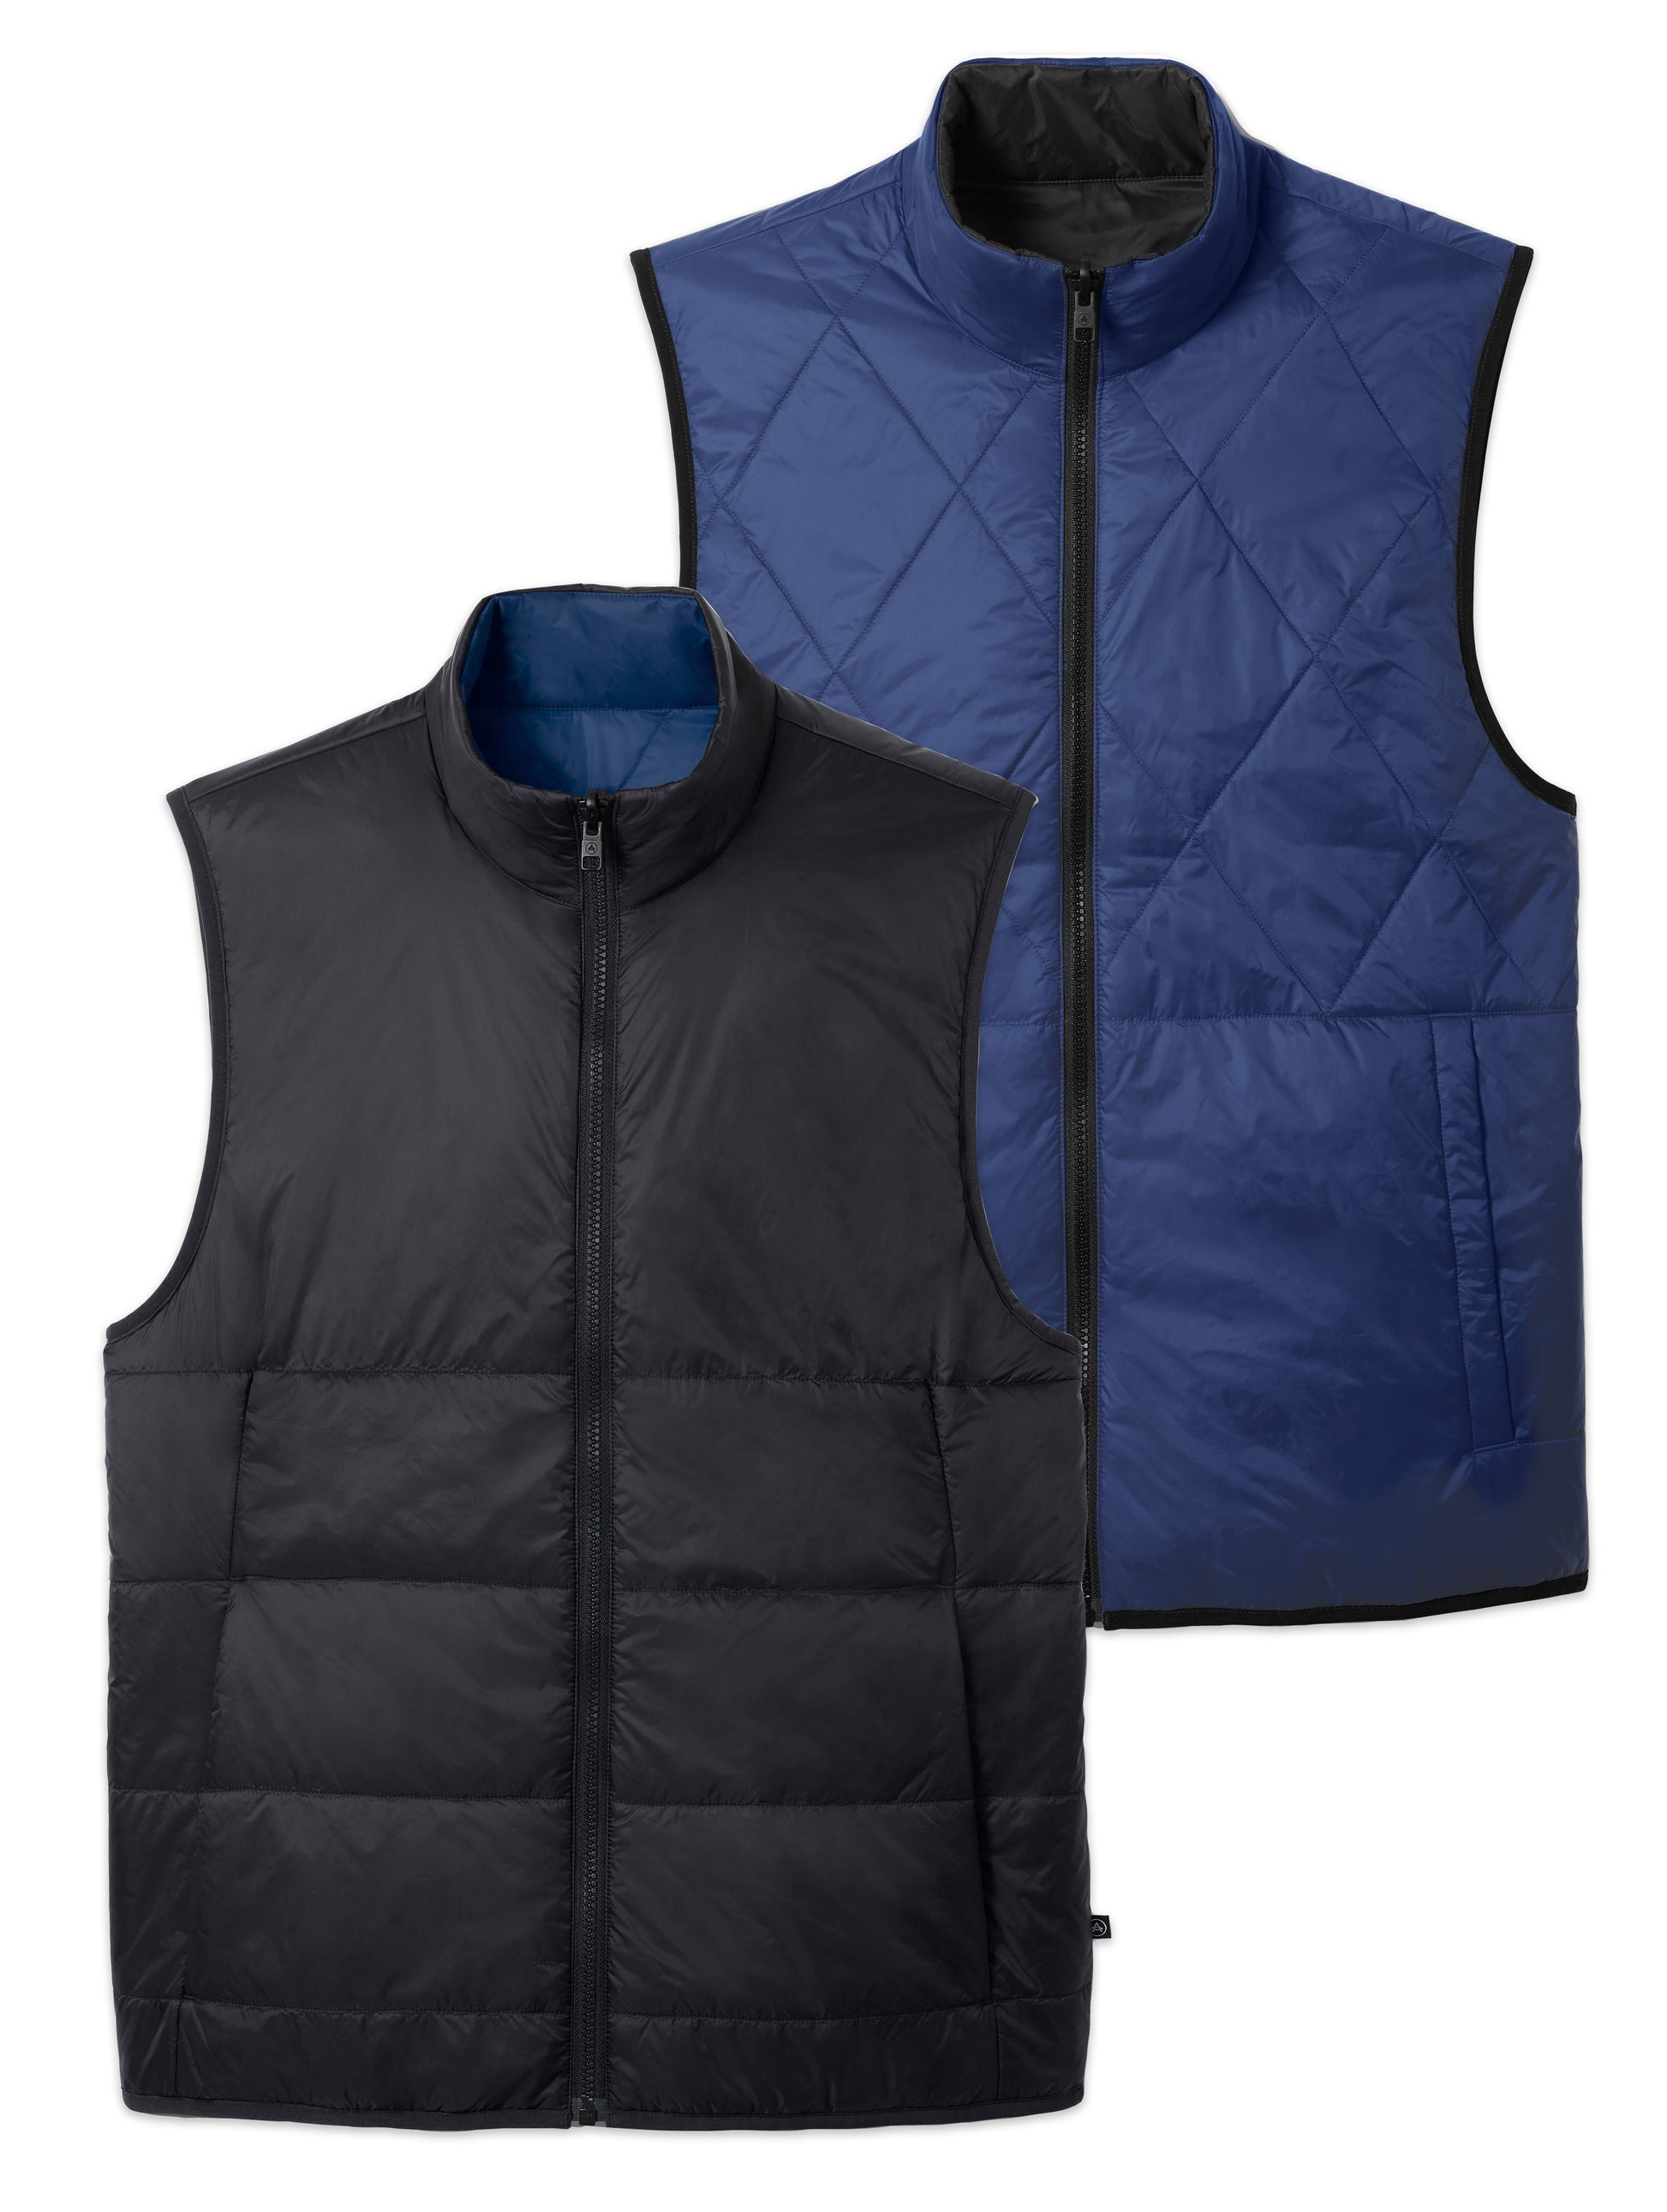 reversible vest with black and blue side